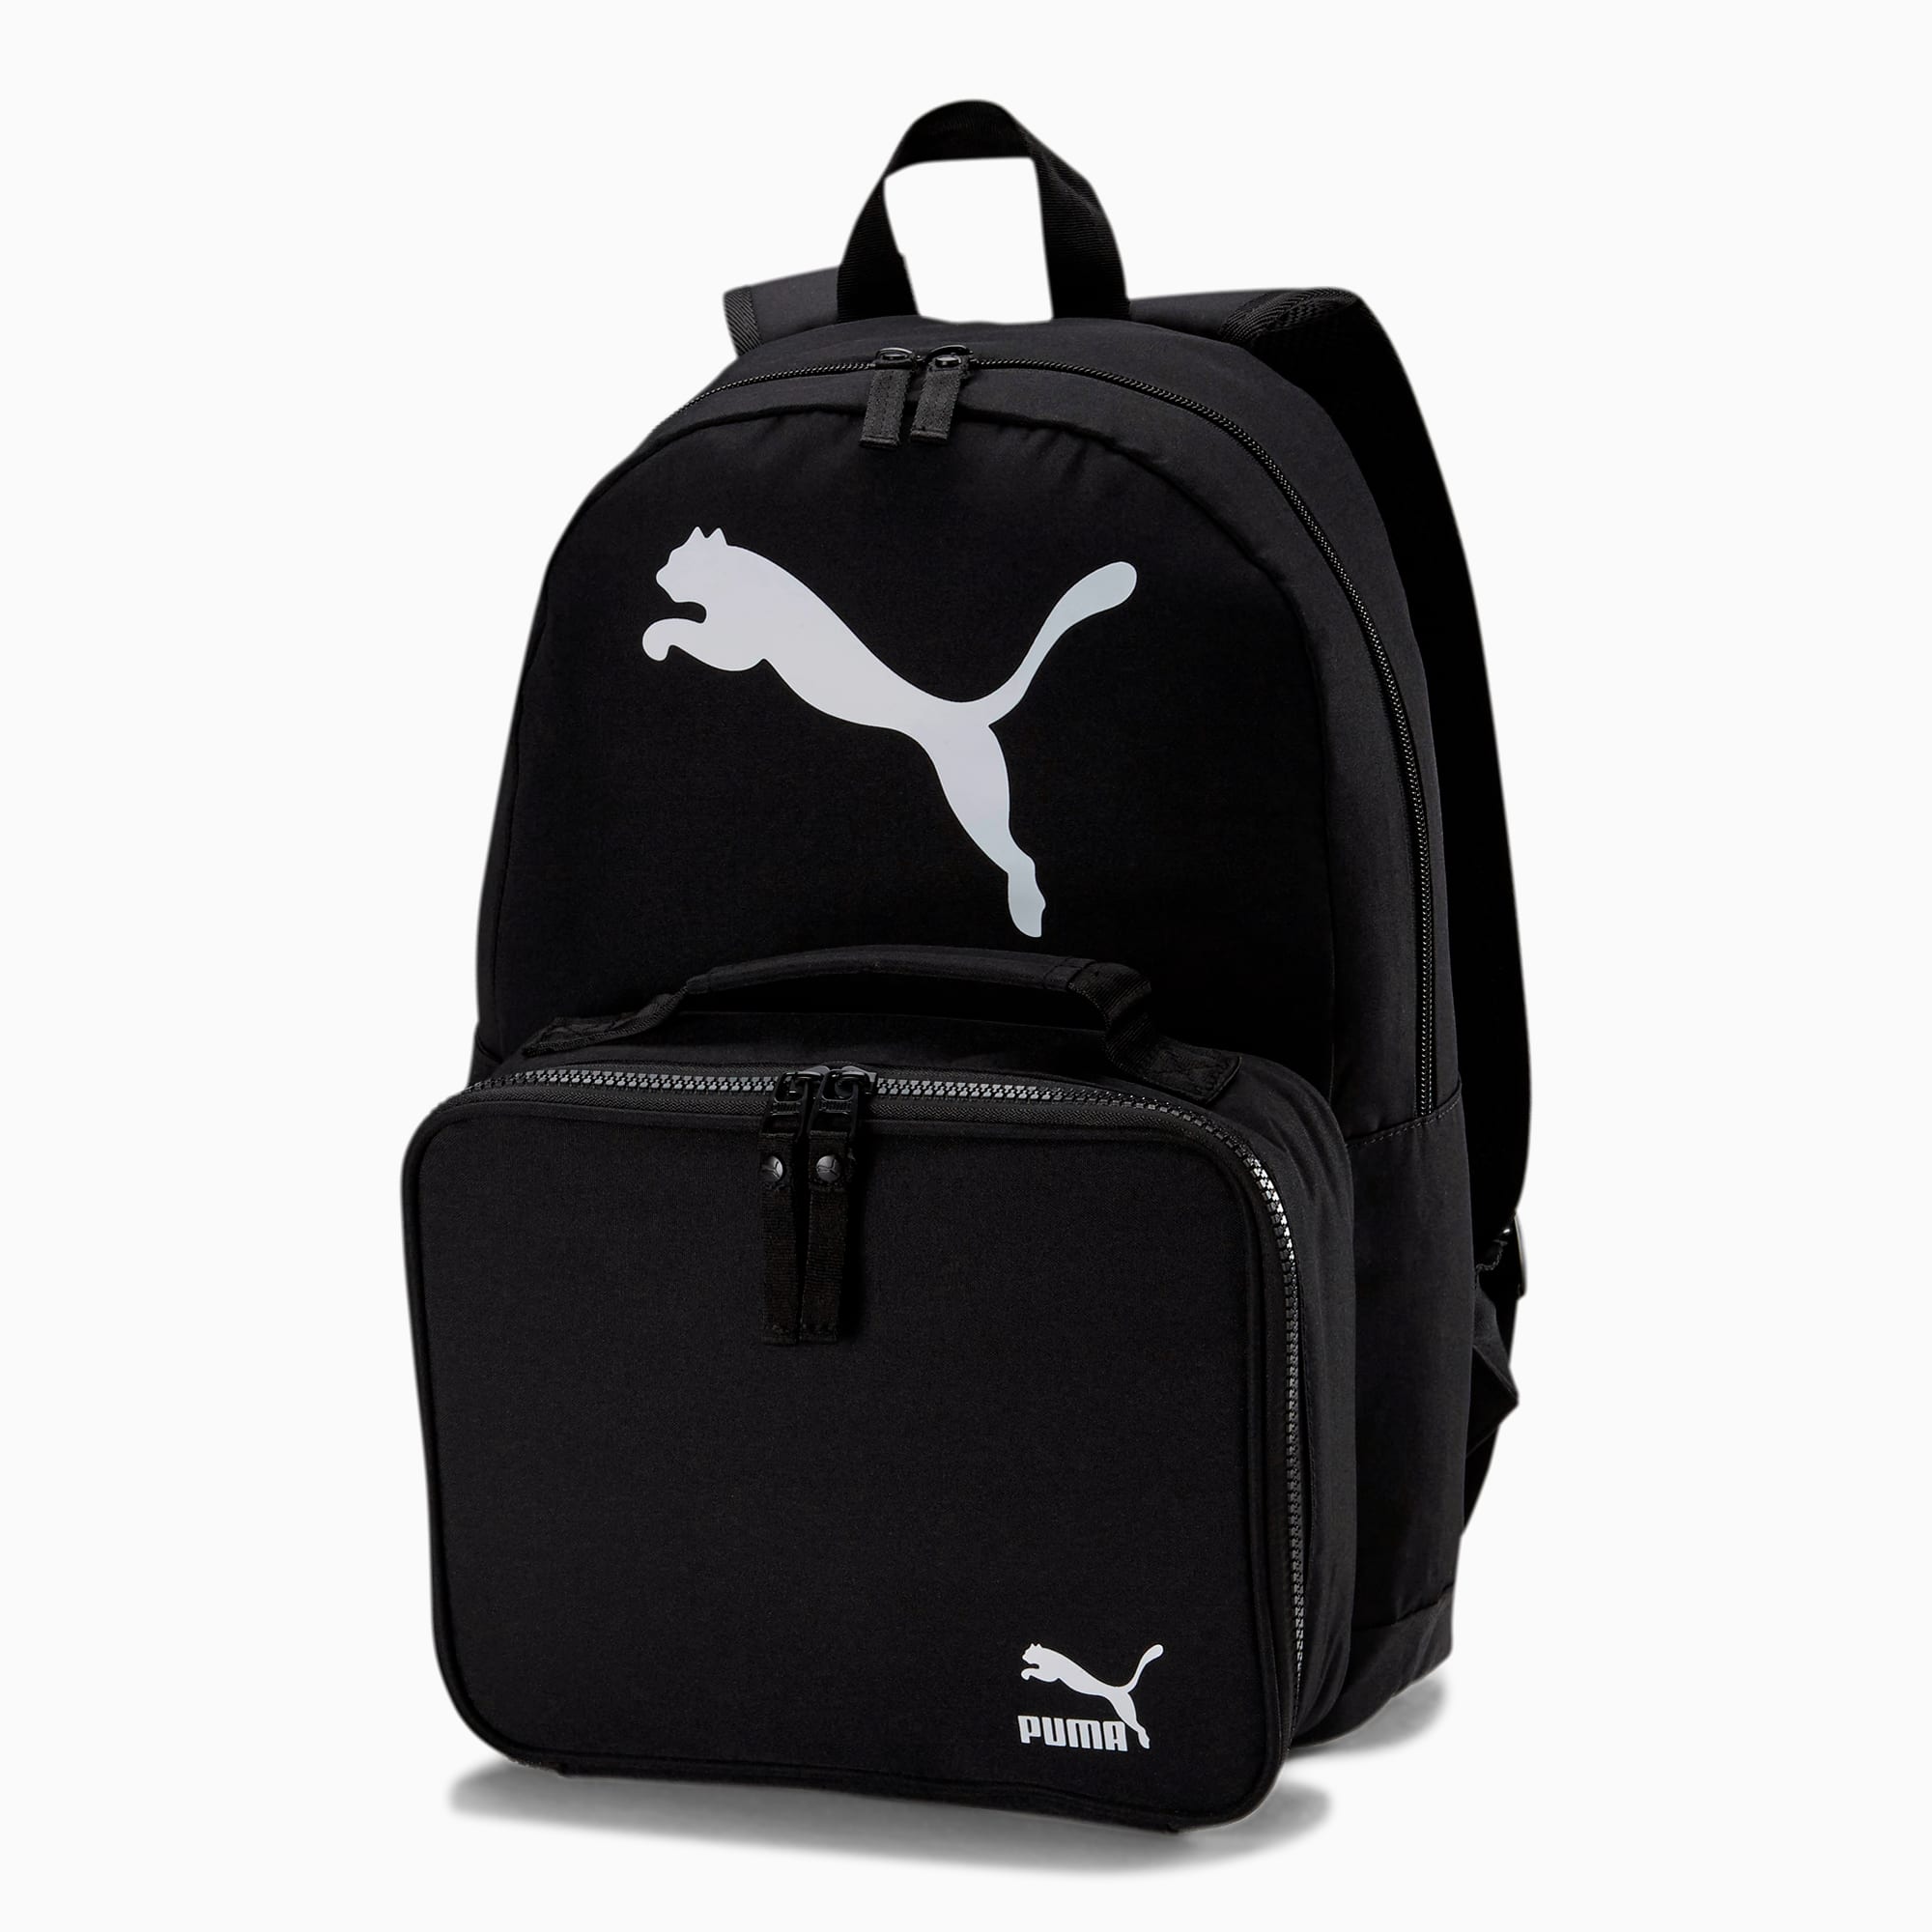 Lunch Kit Combo Backpack | PUMA US